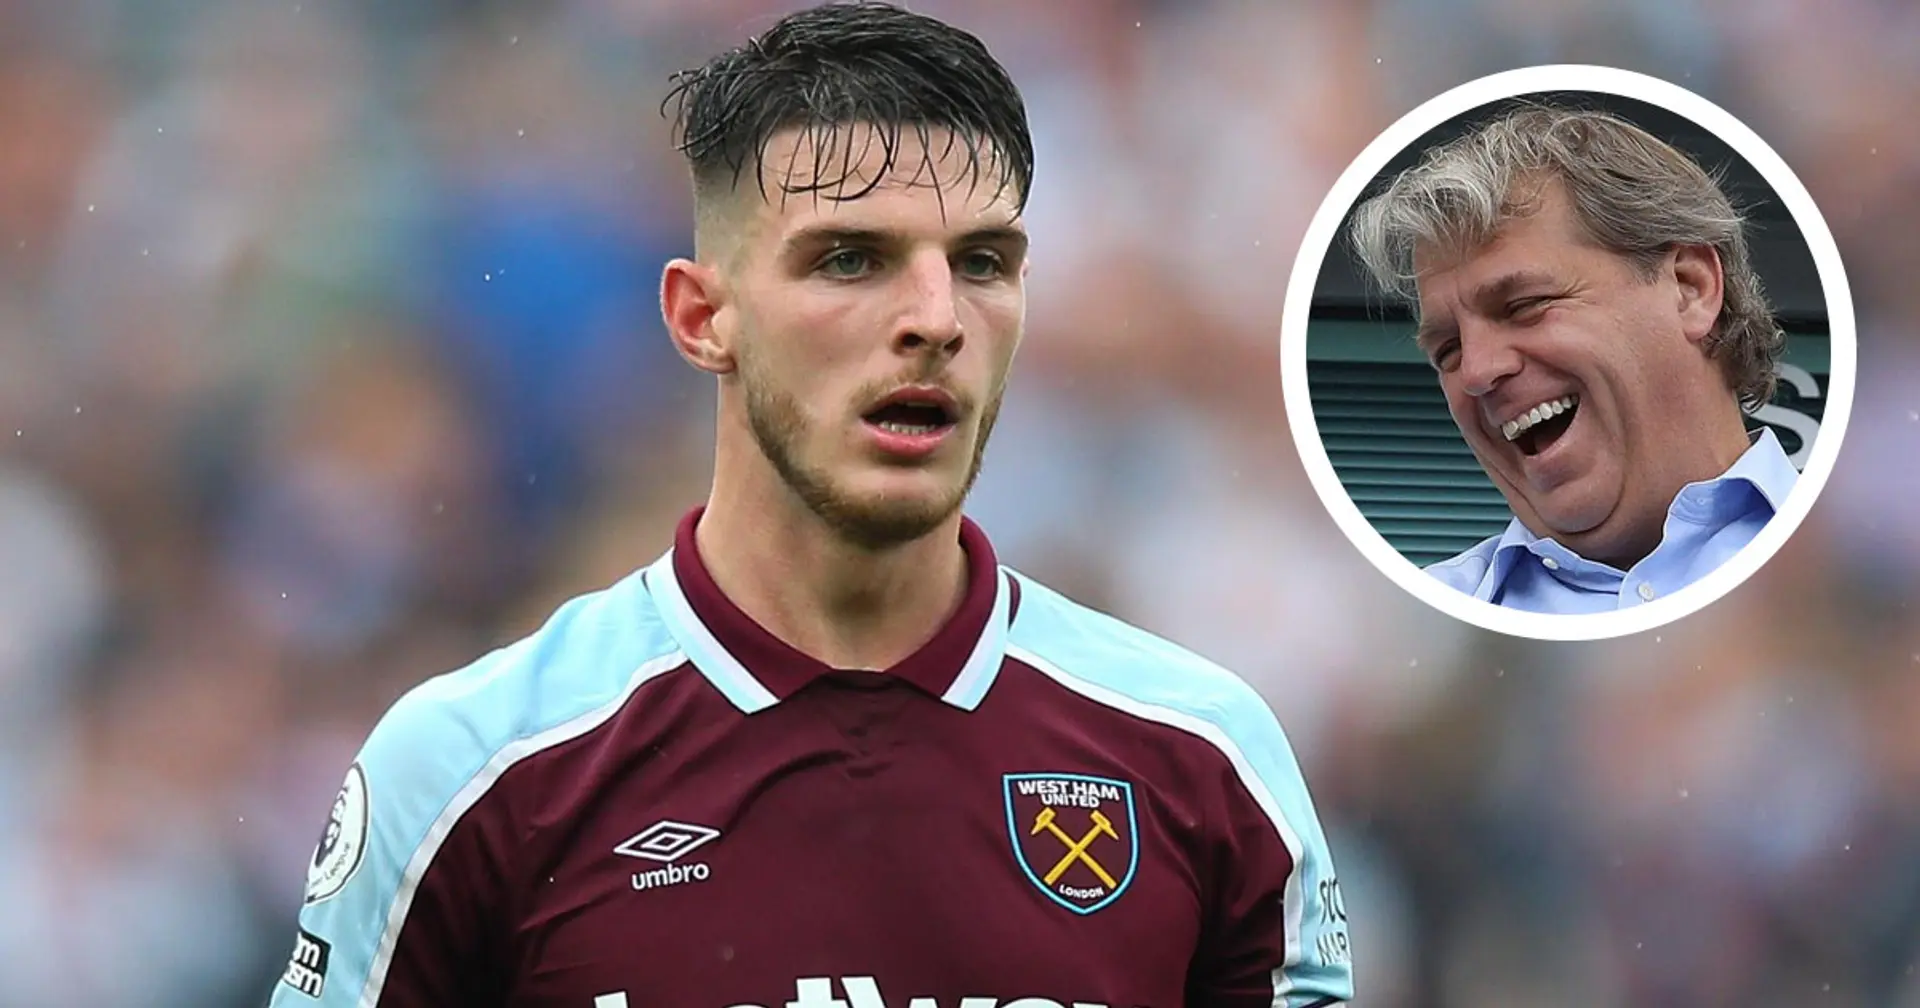 Chelsea 'leading' race to sign Declan Rice next summer - his stance revealed (reliability: 3 stars)